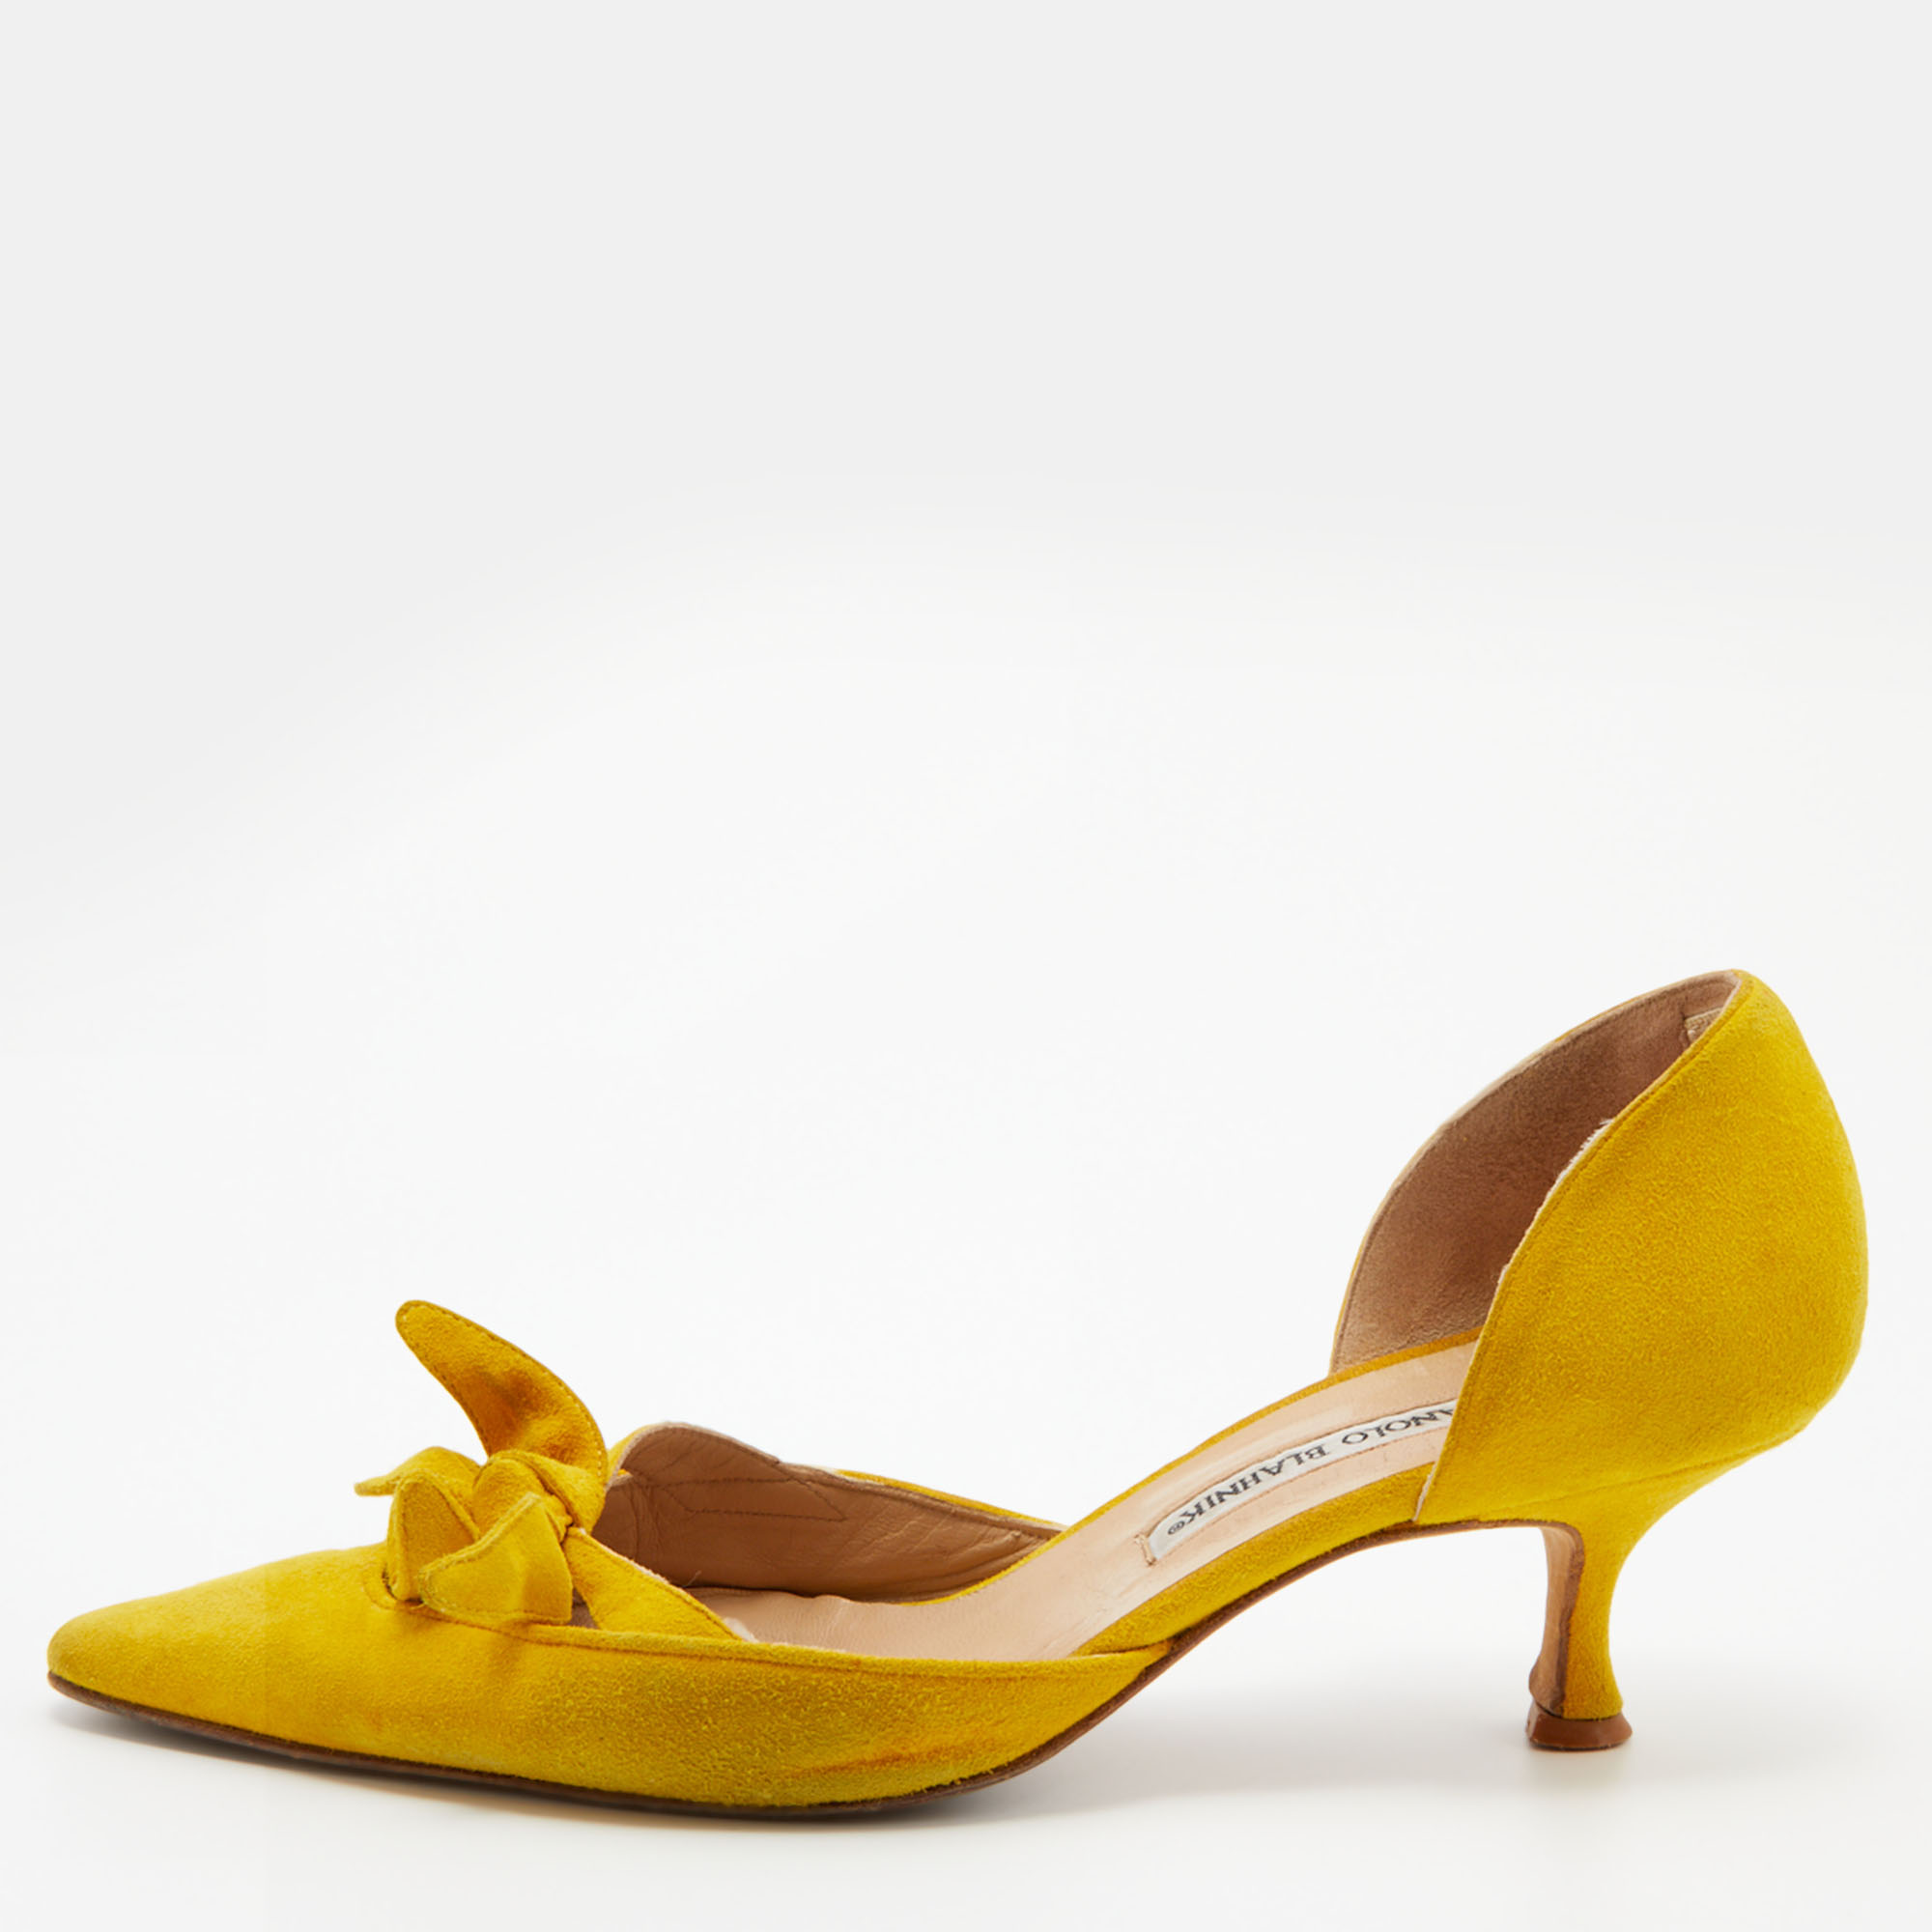 Pre-owned Manolo Blahnik Suede Pointed Toe Knot Vintage D'orsay Pumps Size 38 In Yellow